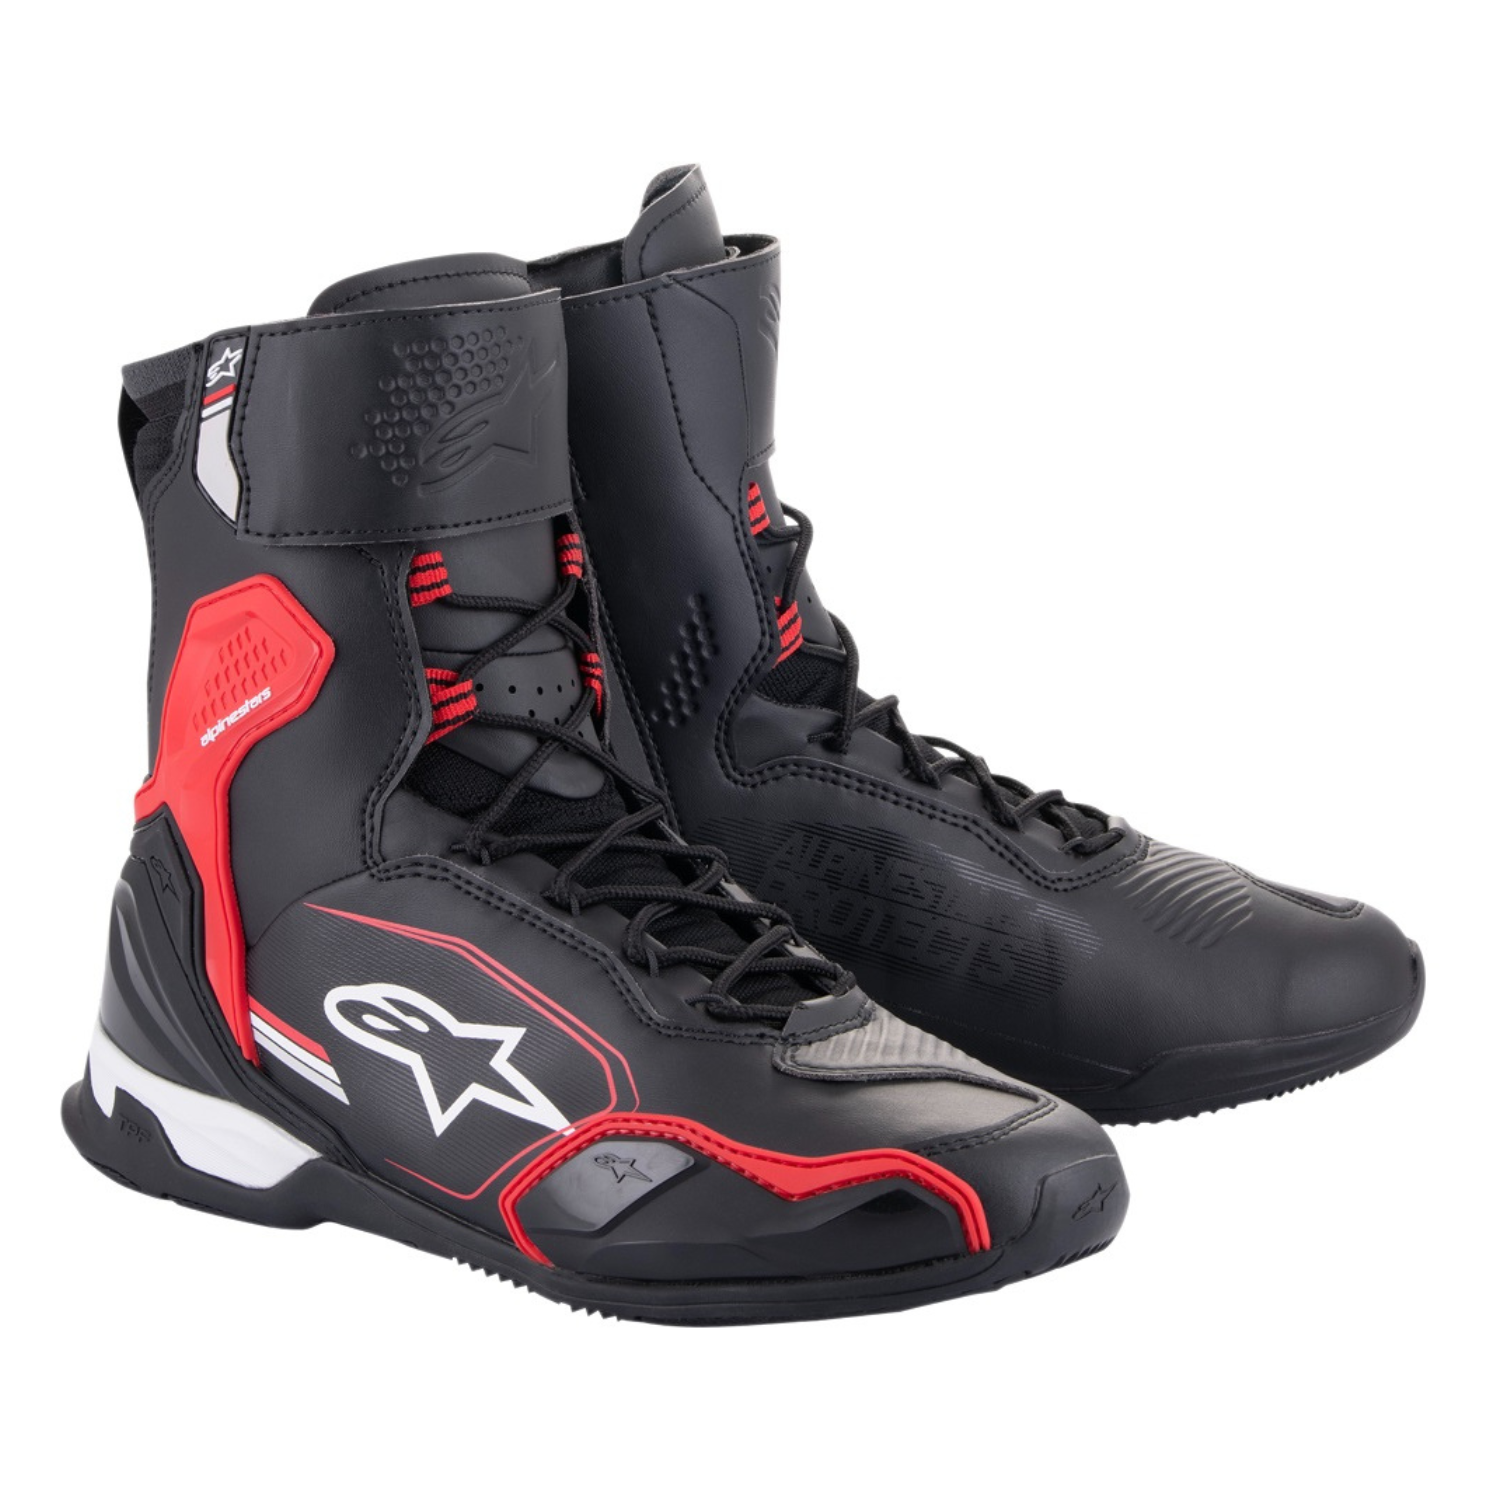 Image of Alpinestars Superfaster Shoes Black Bright Red White Size US 9 ID 8059347252629